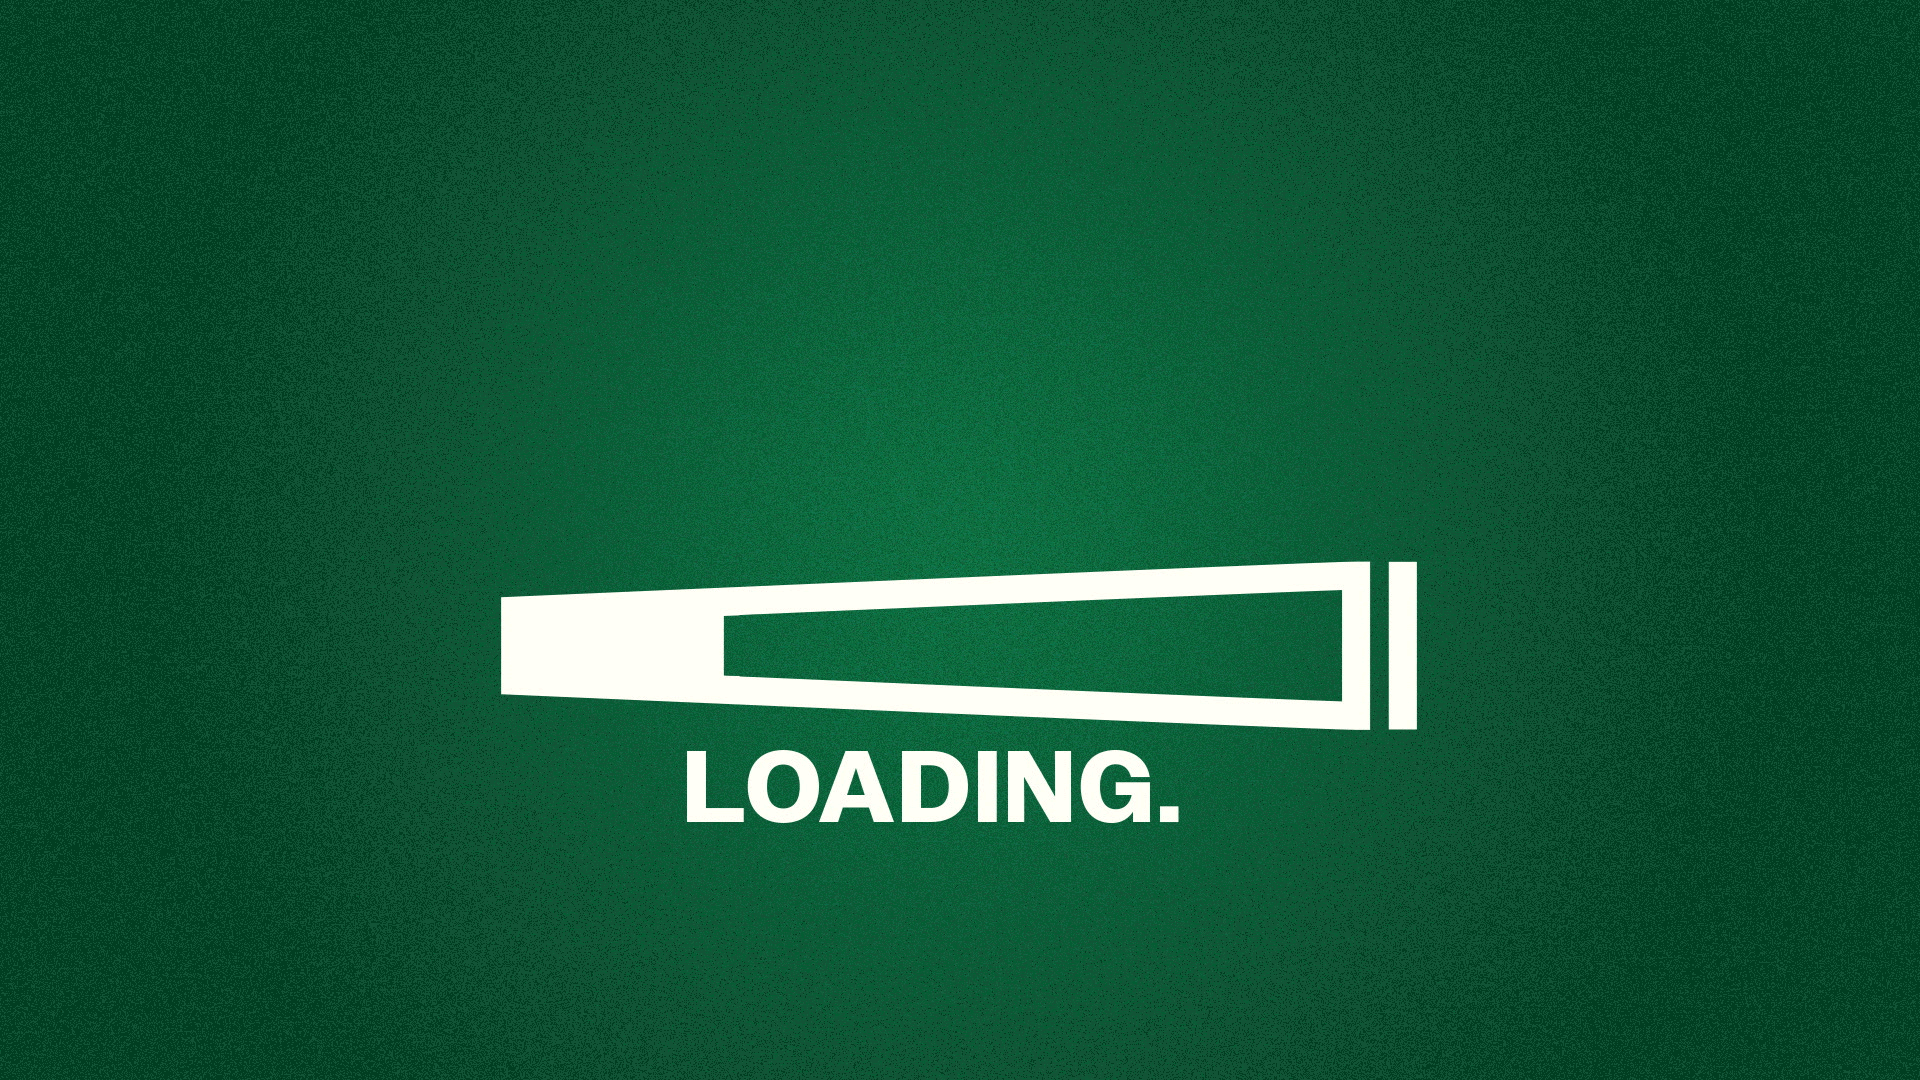 Illustration of a loading bar made out of a joint.